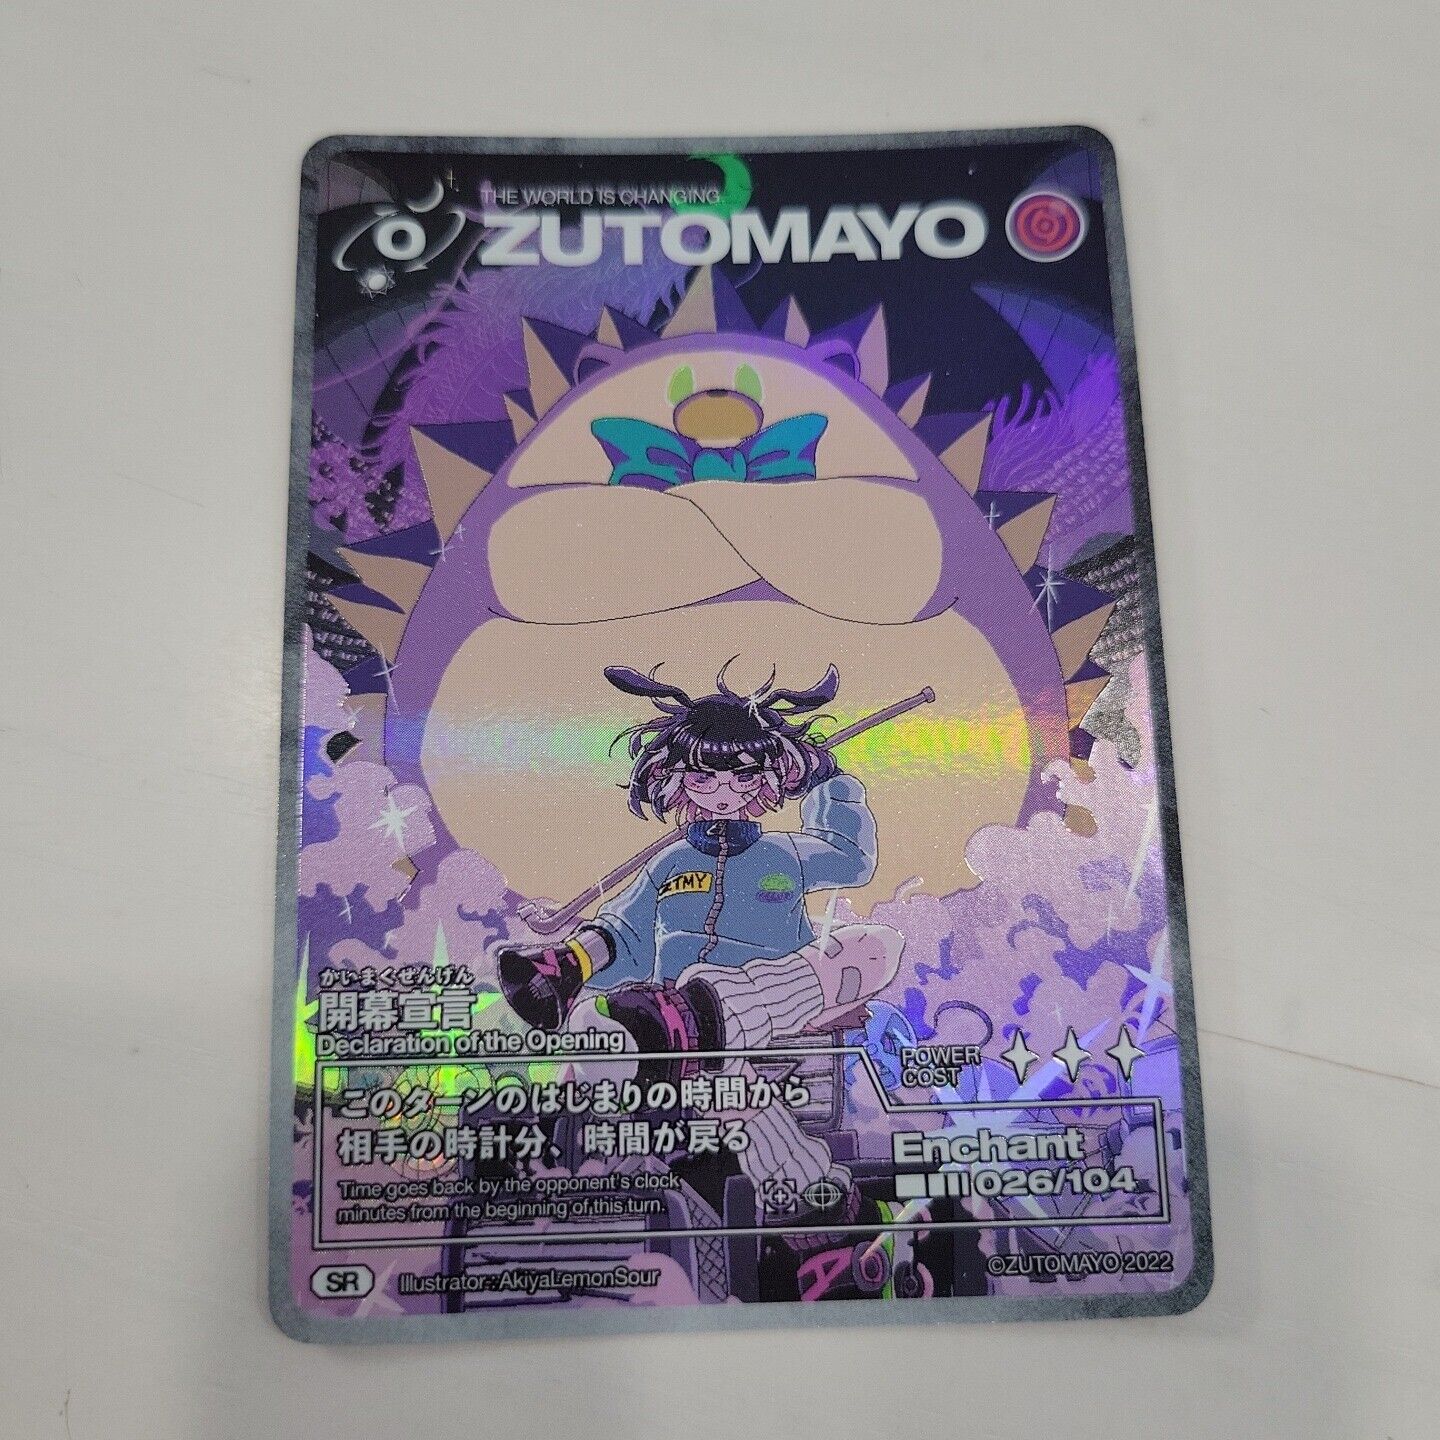 zutomayo card Declartion of the Opening / SR NM 026/104